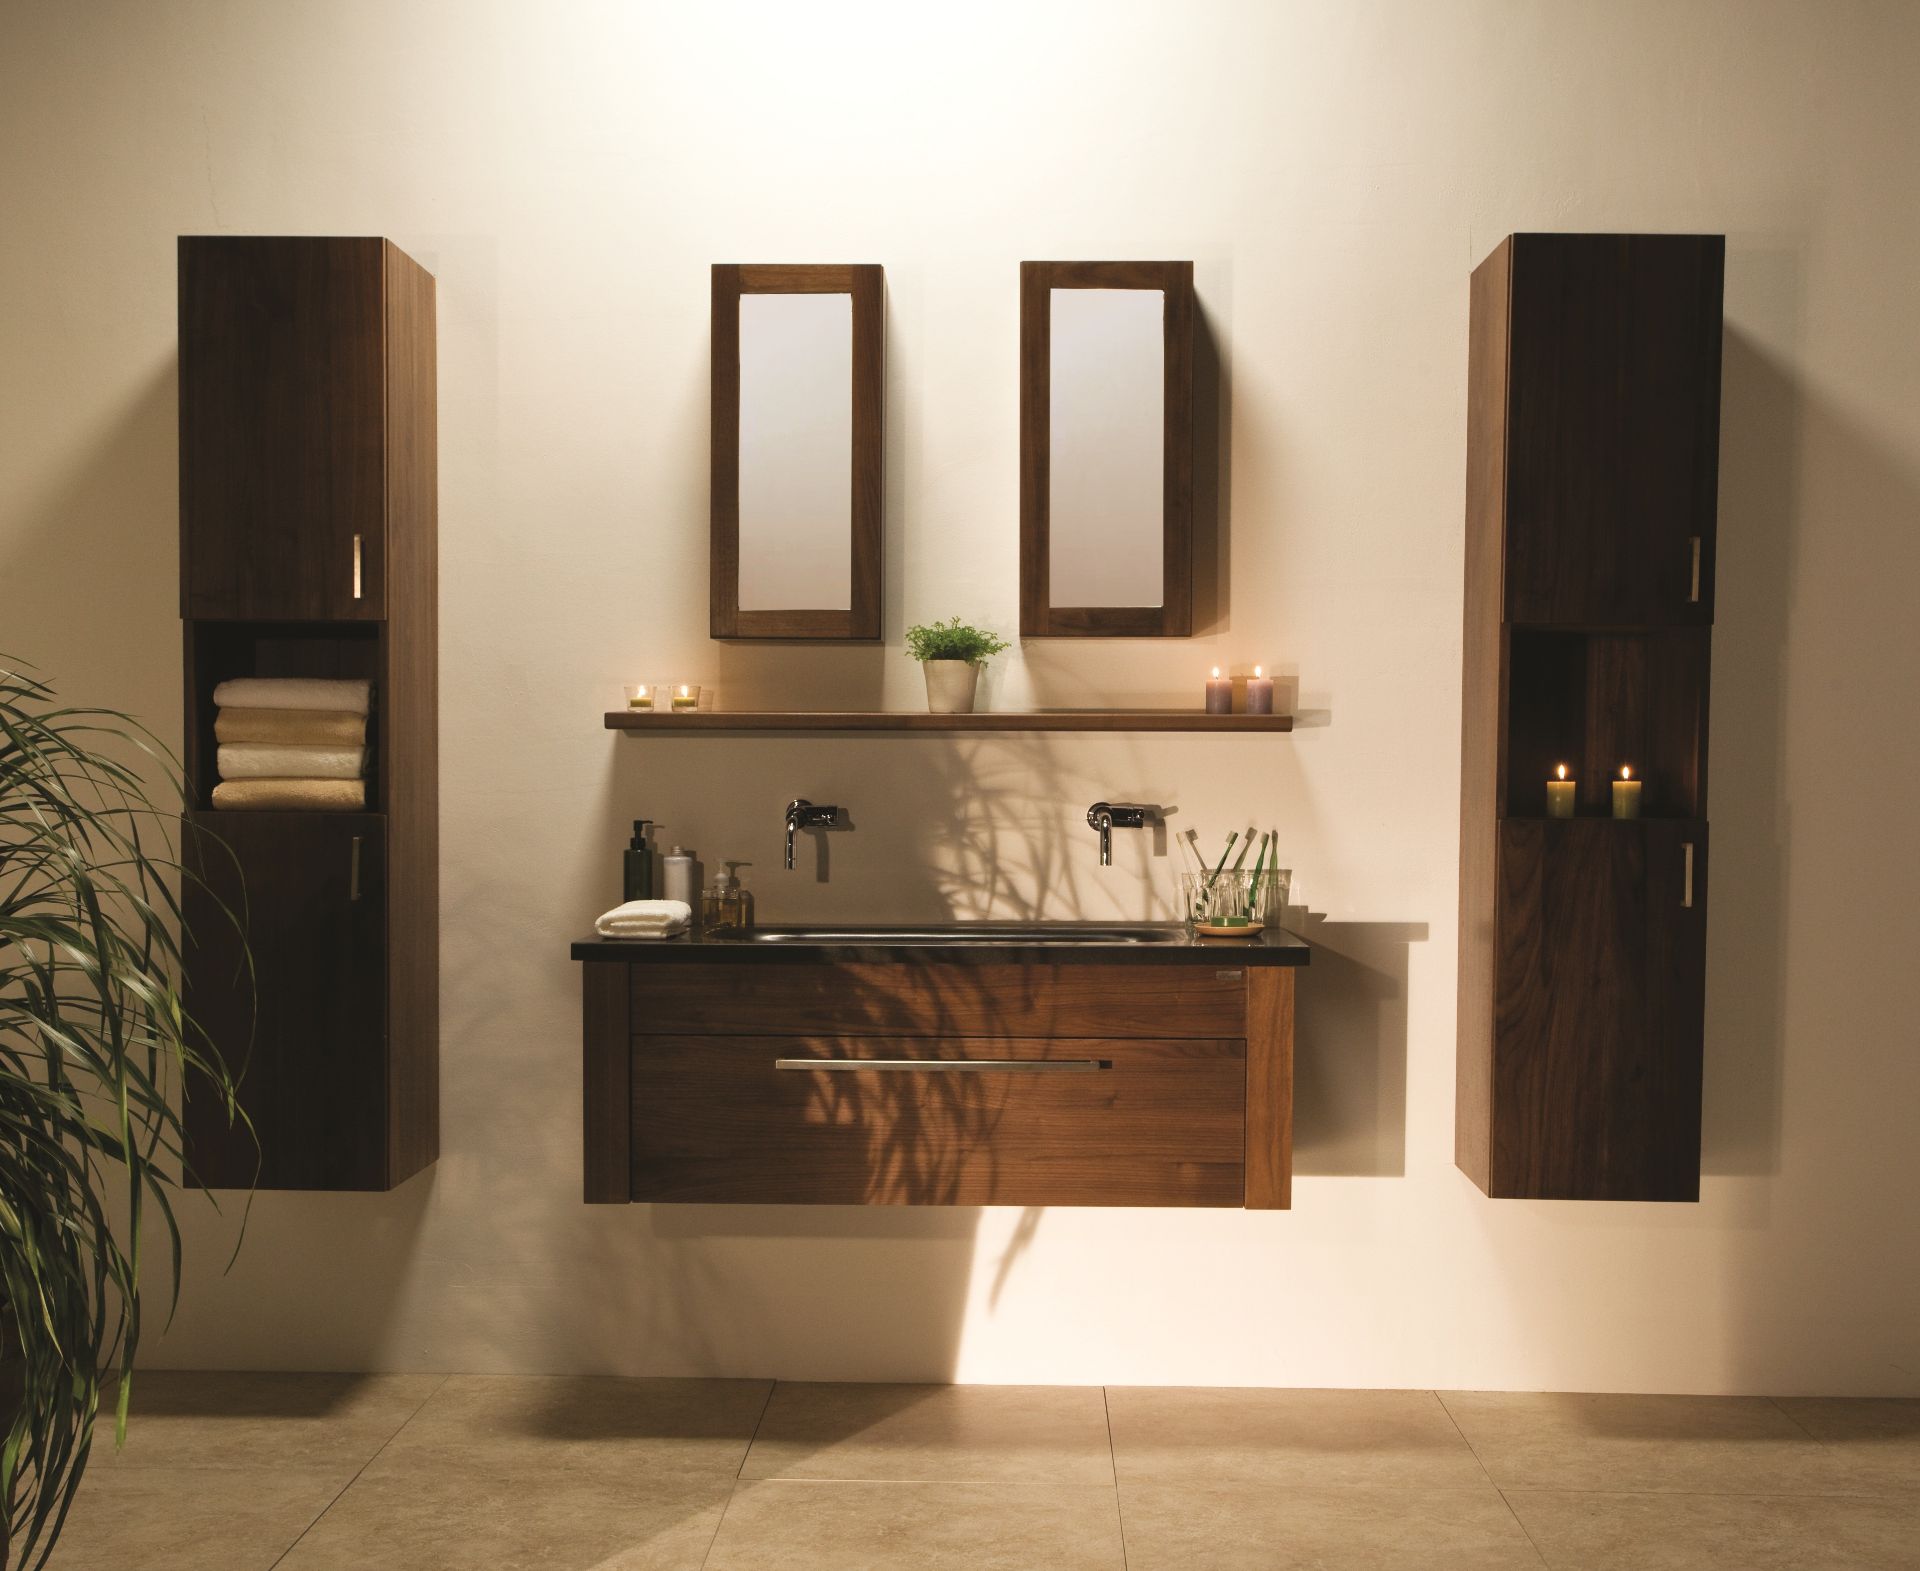 1 x Stonearth 'Venice' Wall Mounted 1200mm Washstand - American Solid Walnut - Original RRP £1,270 - Image 8 of 9